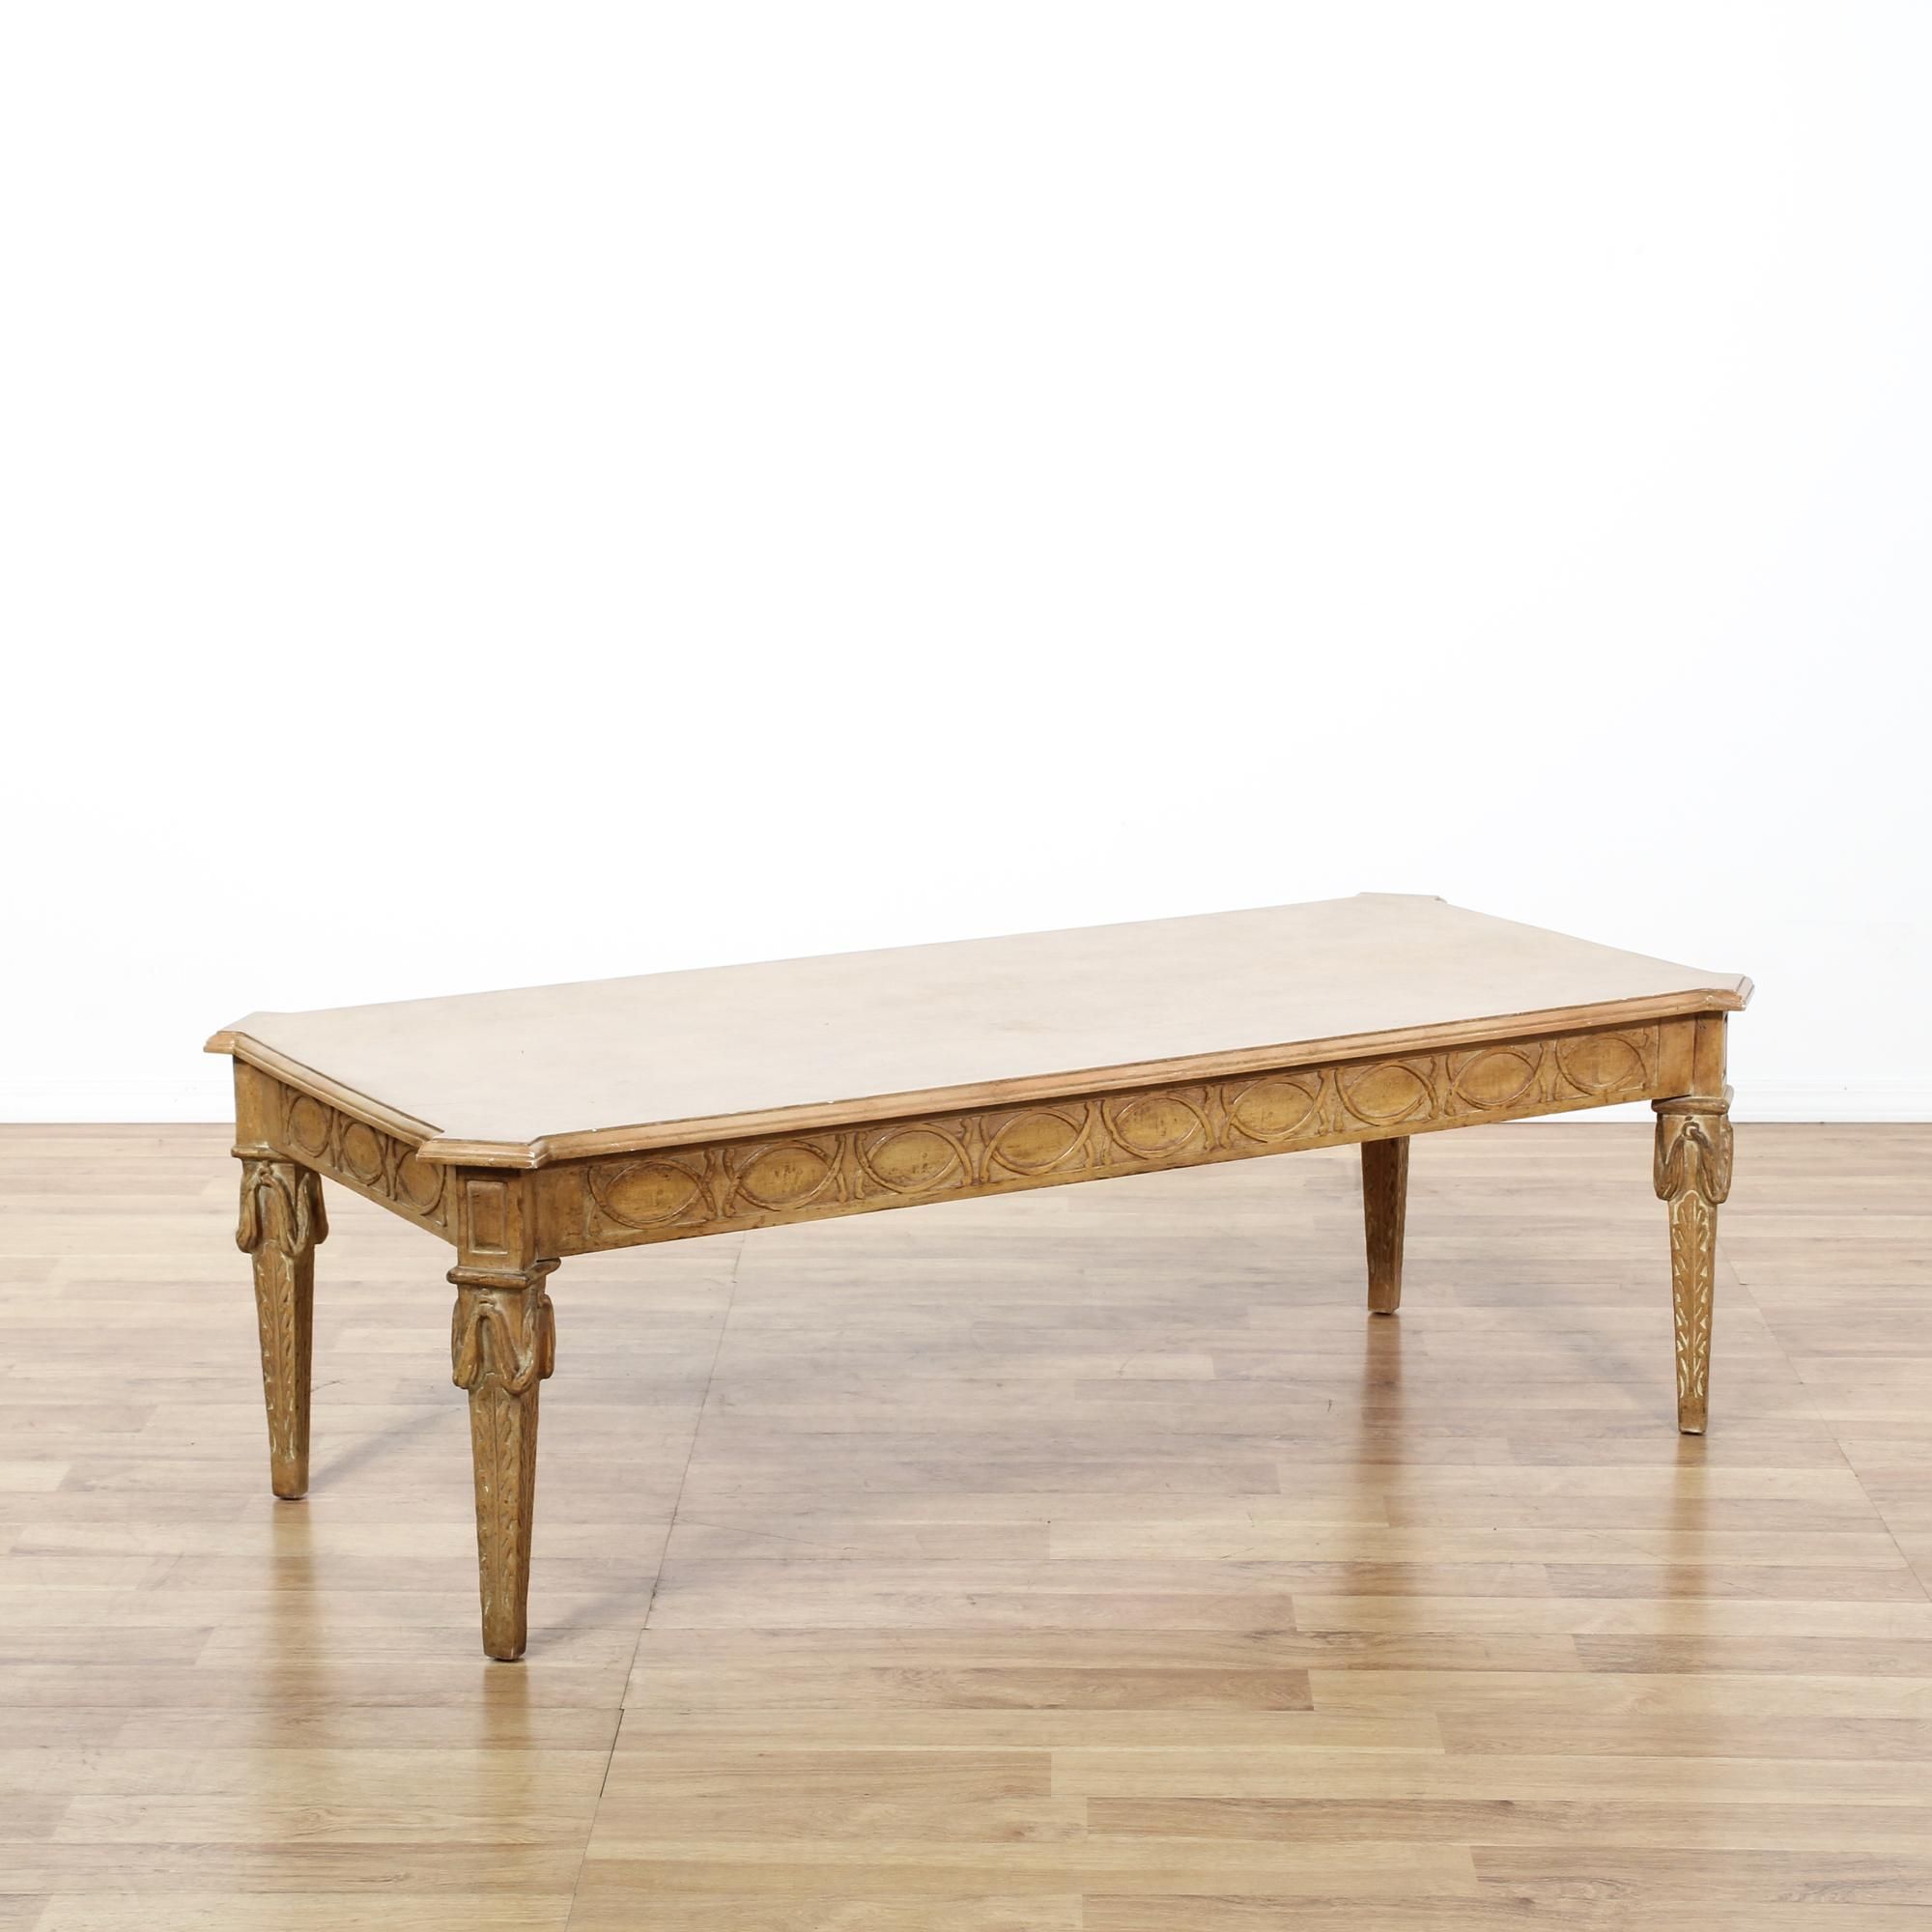 This Carved Coffee Table Is Featured In A Solid Wood With With Regard To Oceanside White Washed Coffee Tables (View 3 of 15)